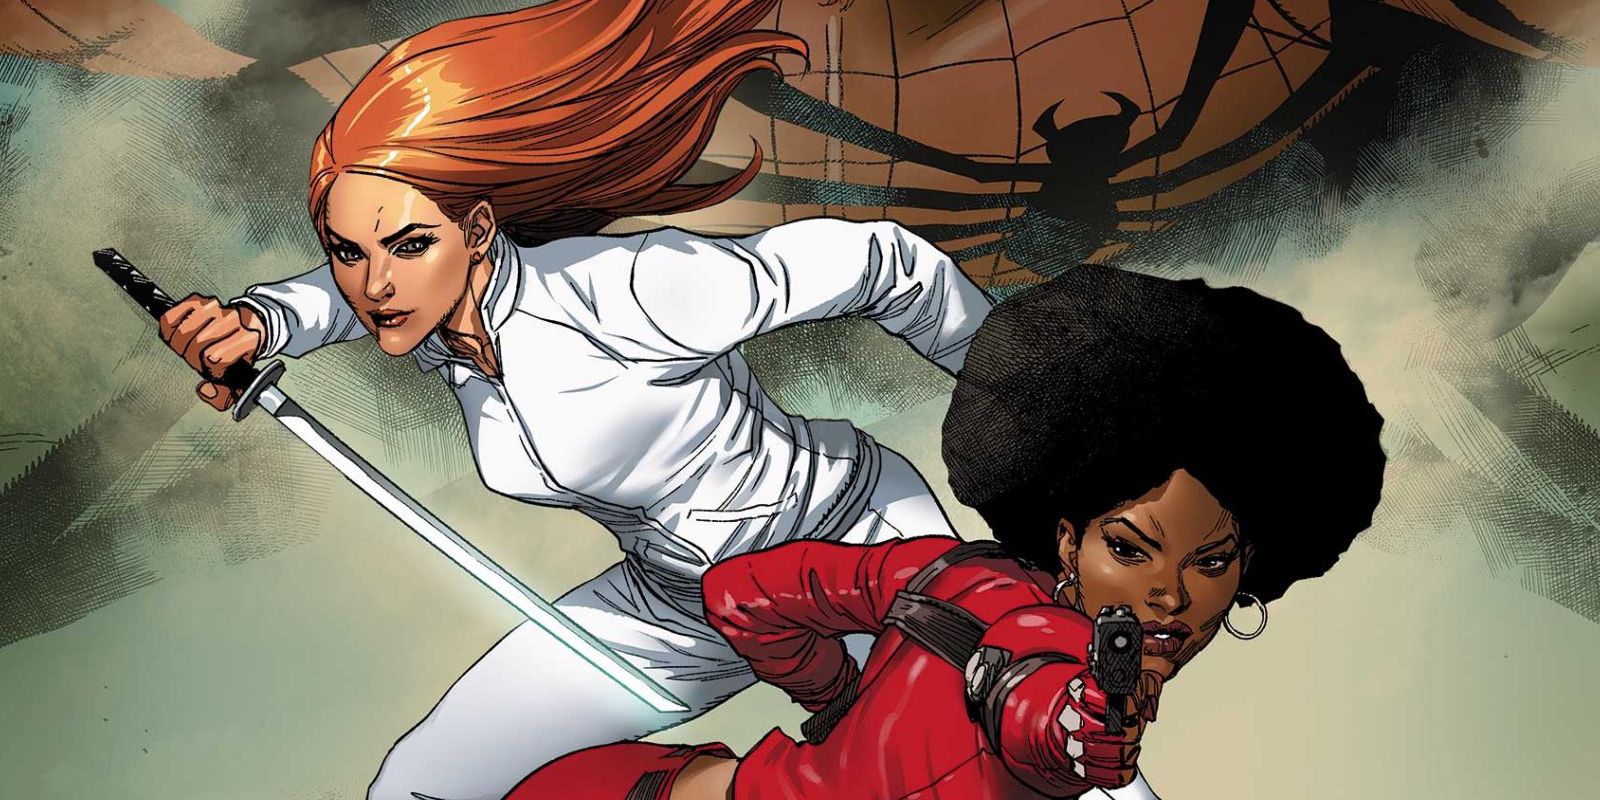 Daughters of the Dragon Misty Knight and Colleen Wing with Spider-Man's costume in the background.